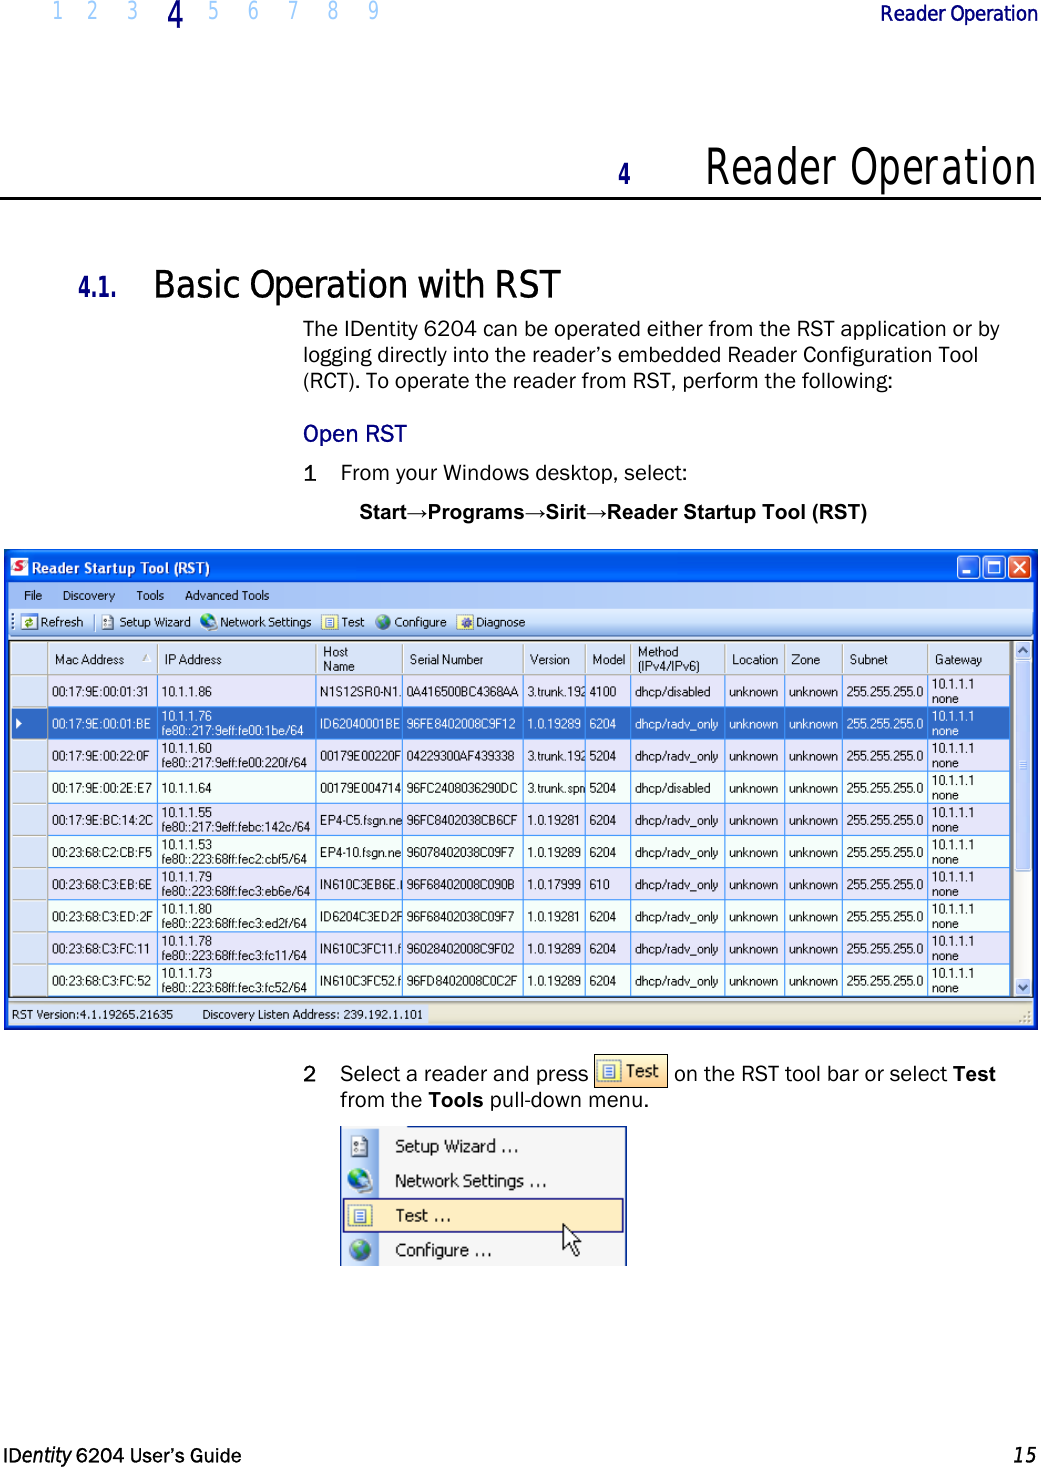  1 2 3 4  5 6 7 8 9             Reader Operation   IDentity 6204 User’s Guide  15  4 Reader Operation  4.1. Basic Operation with RST The IDentity 6204 can be operated either from the RST application or by logging directly into the reader’s embedded Reader Configuration Tool (RCT). To operate the reader from RST, perform the following: Open RST 1 From your Windows desktop, select: Start→Programs→Sirit→Reader Startup Tool (RST)  2 Select a reader and press   on the RST tool bar or select Test from the Tools pull-down menu.  